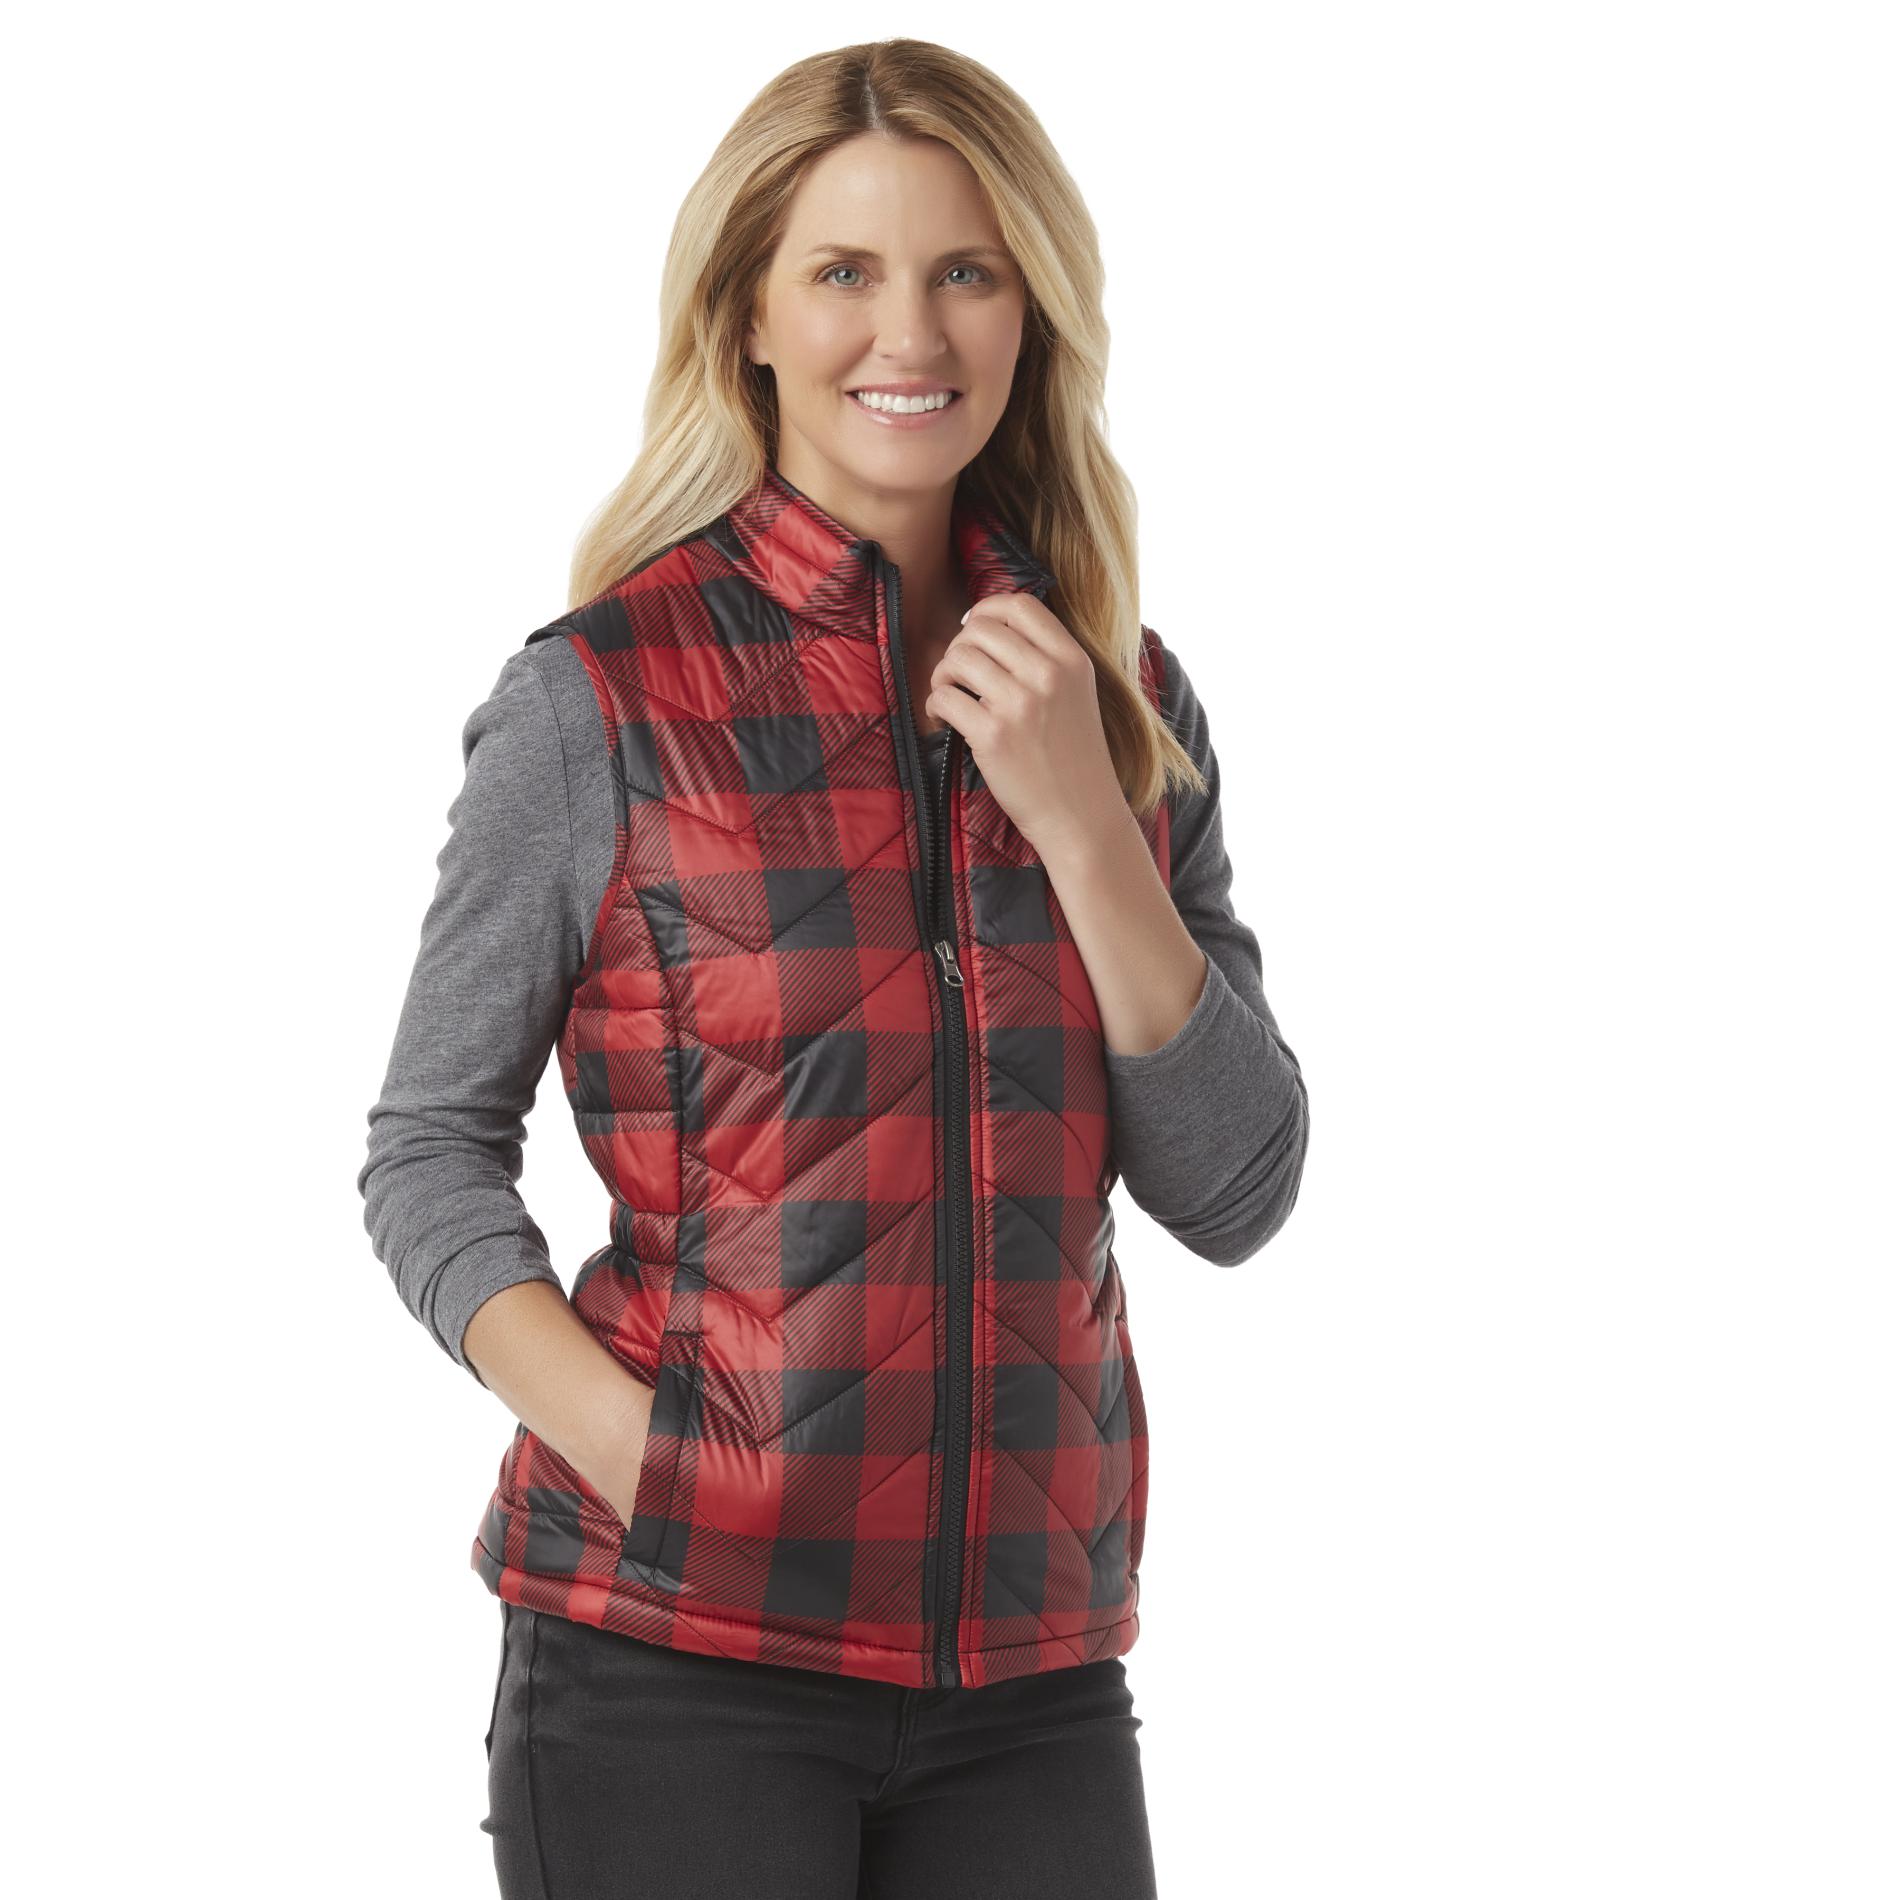 Basic Editions Women's Quilted Vest - Buffalo Plaid